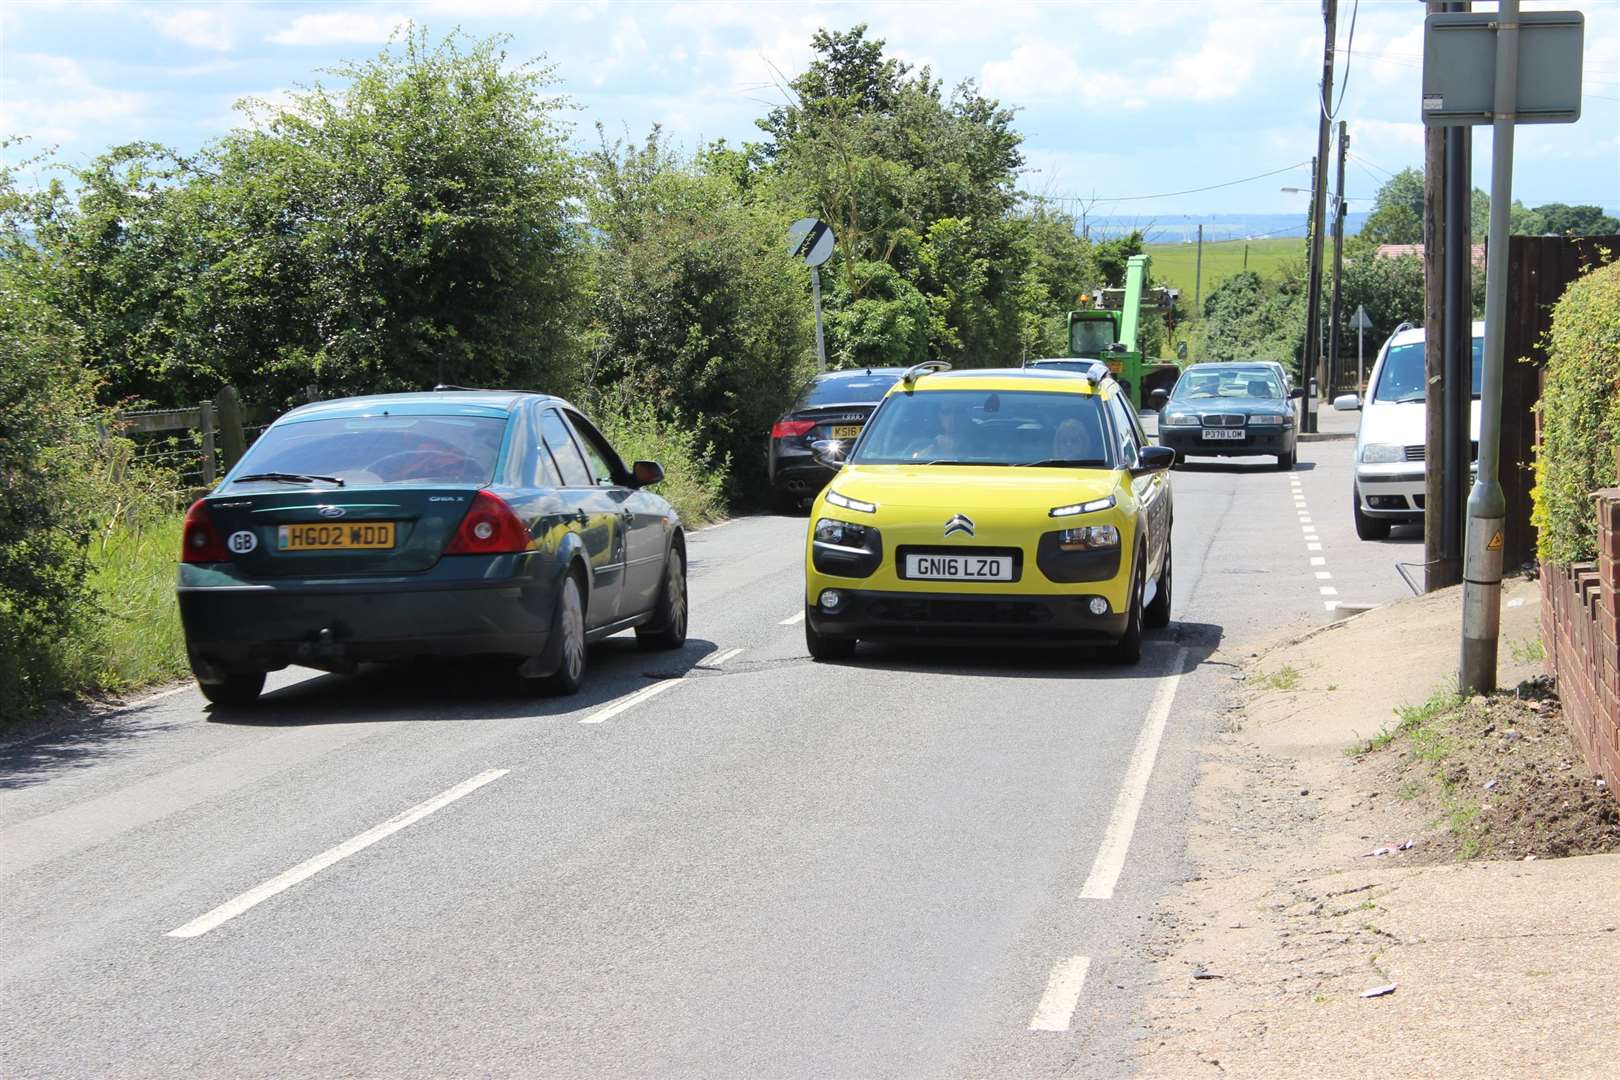 Part of Scocles Road, which could end up with a 30mph limit